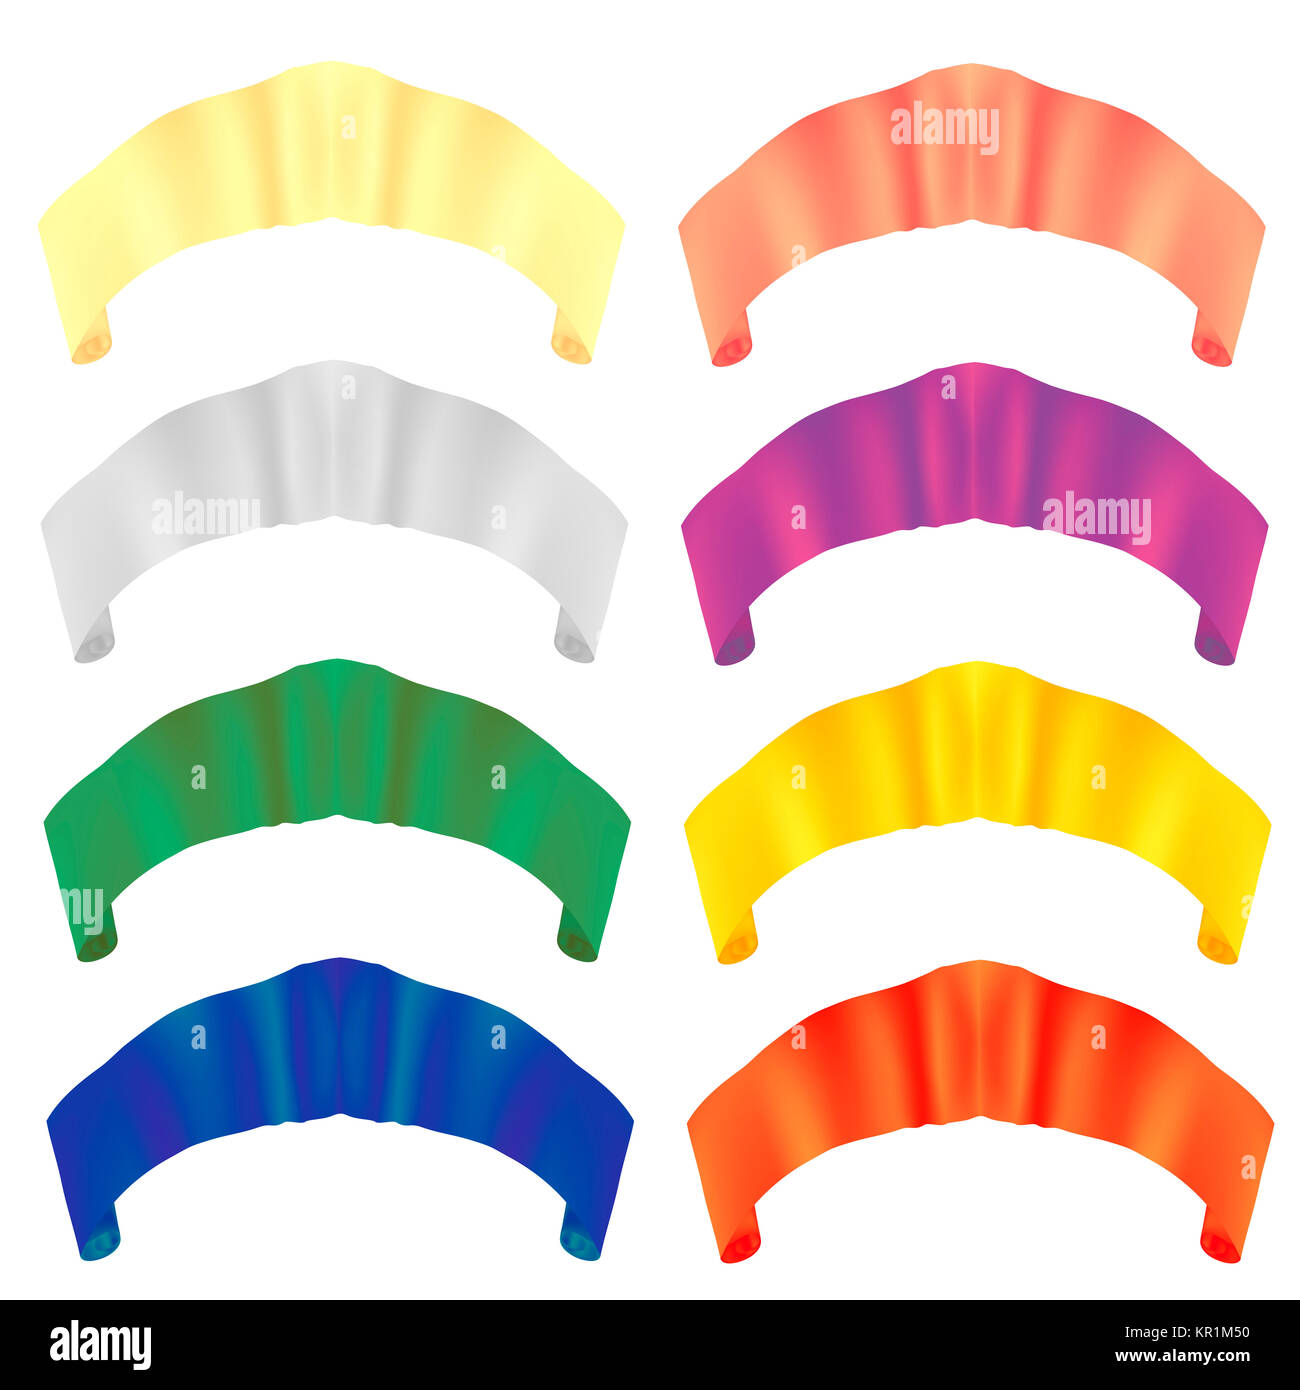 Colorful Paper Scrolls. Colored Ribbons. Stock Photo